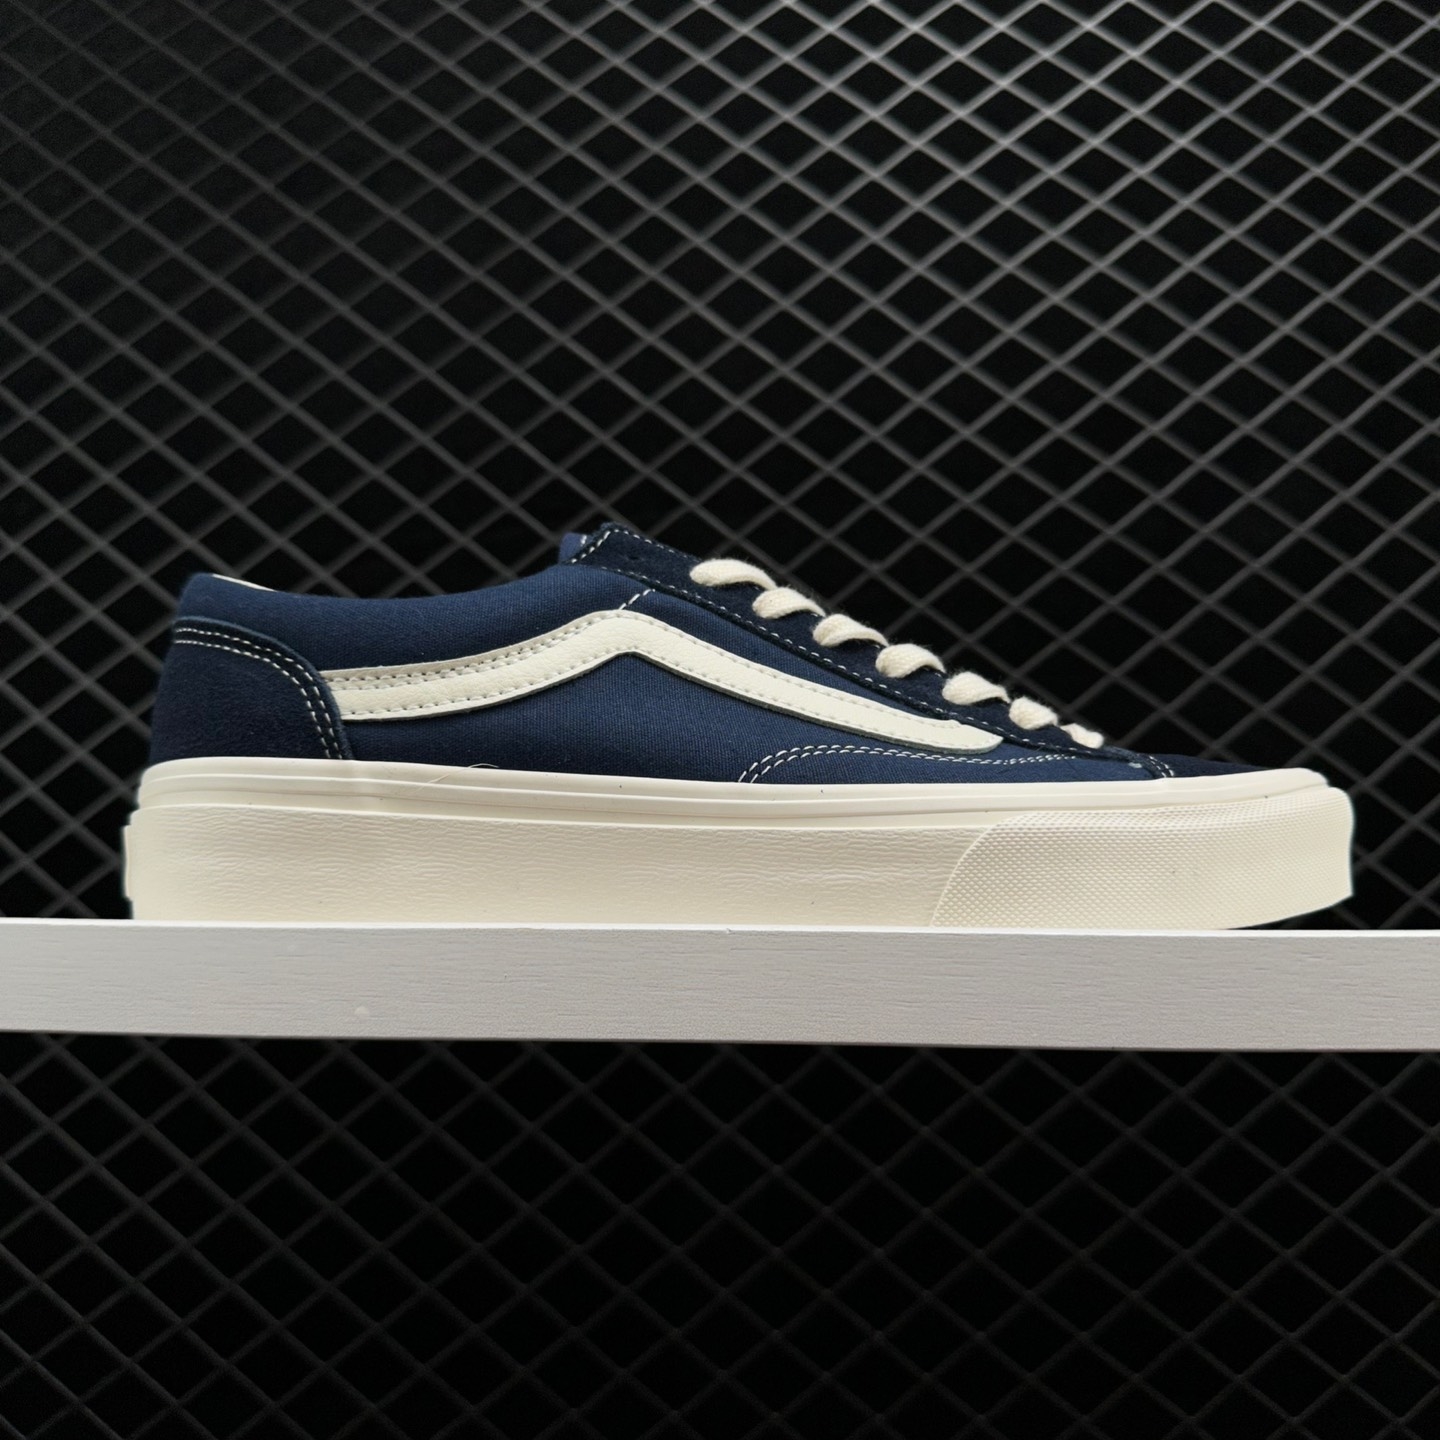 Vans Style 36 Suede 'Dress Blues' VN0A3DZ3RFL - Classic and Stylish Sneakers